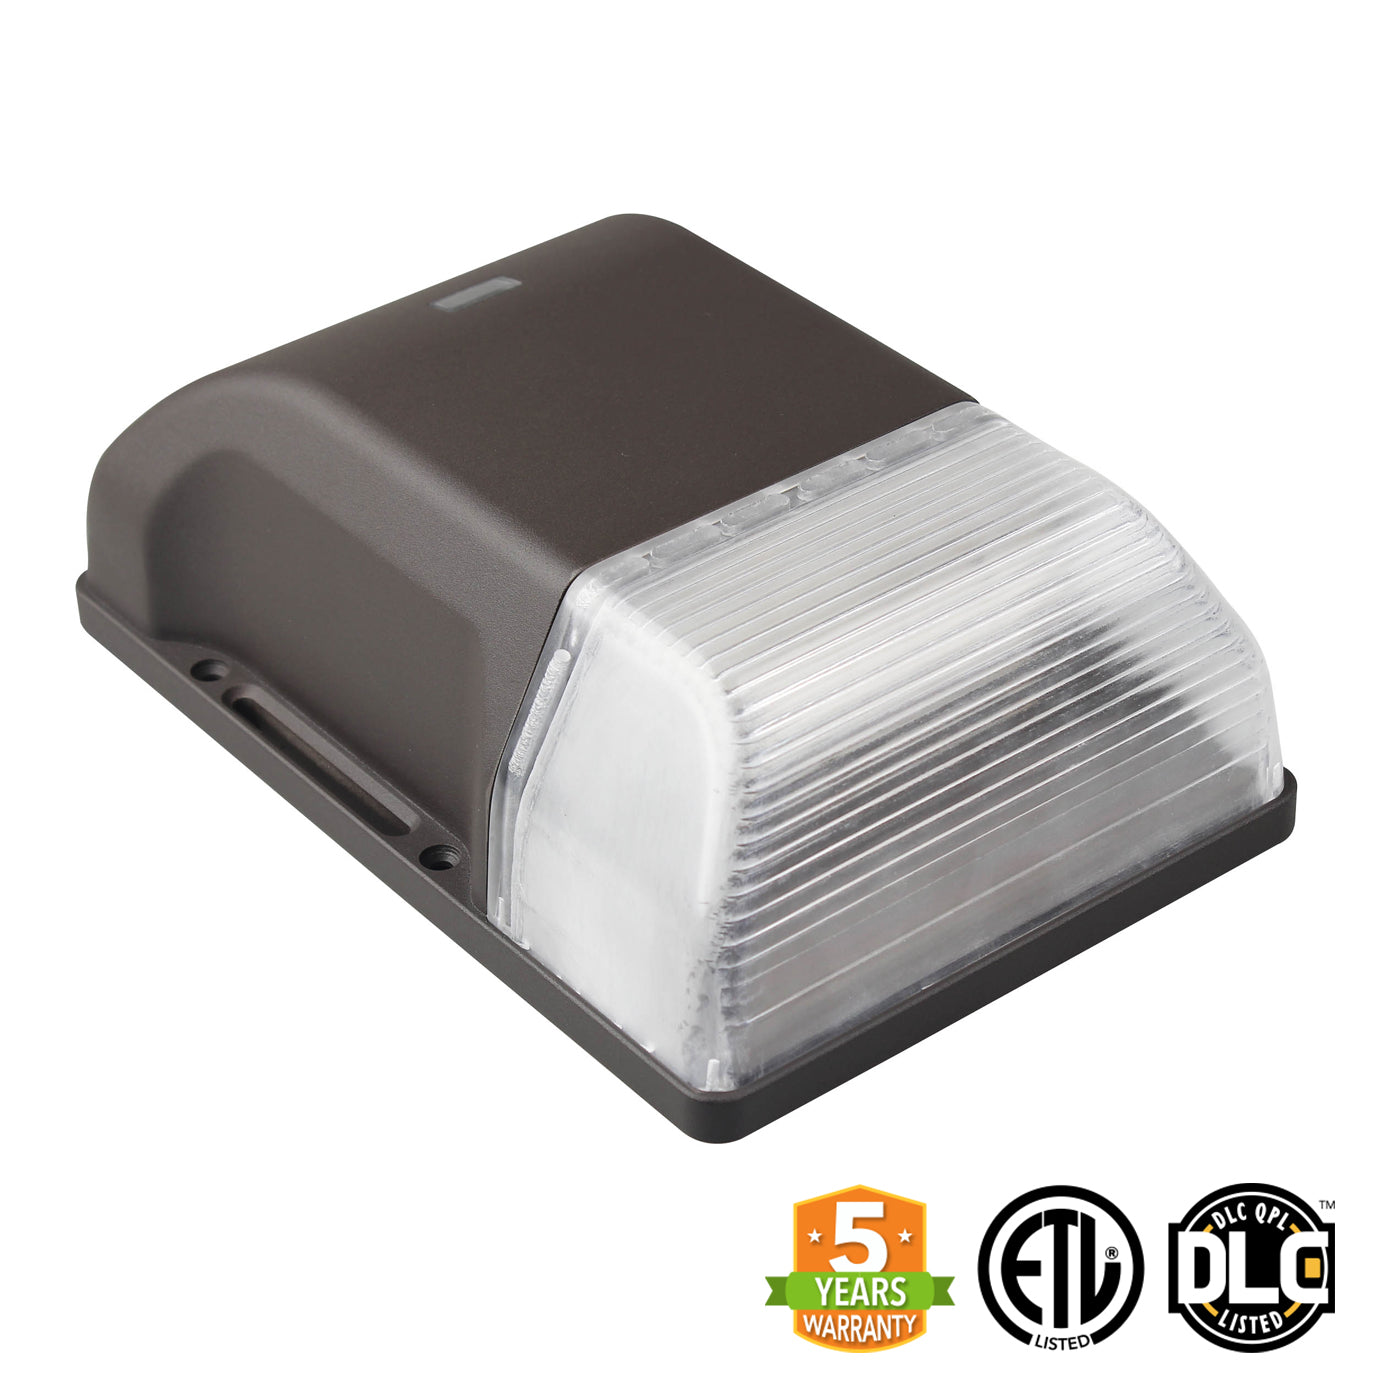 30W LED Mini Wall Pack -Scone Lights, Photocell Capable - 3900LM - 5 Year Warranty